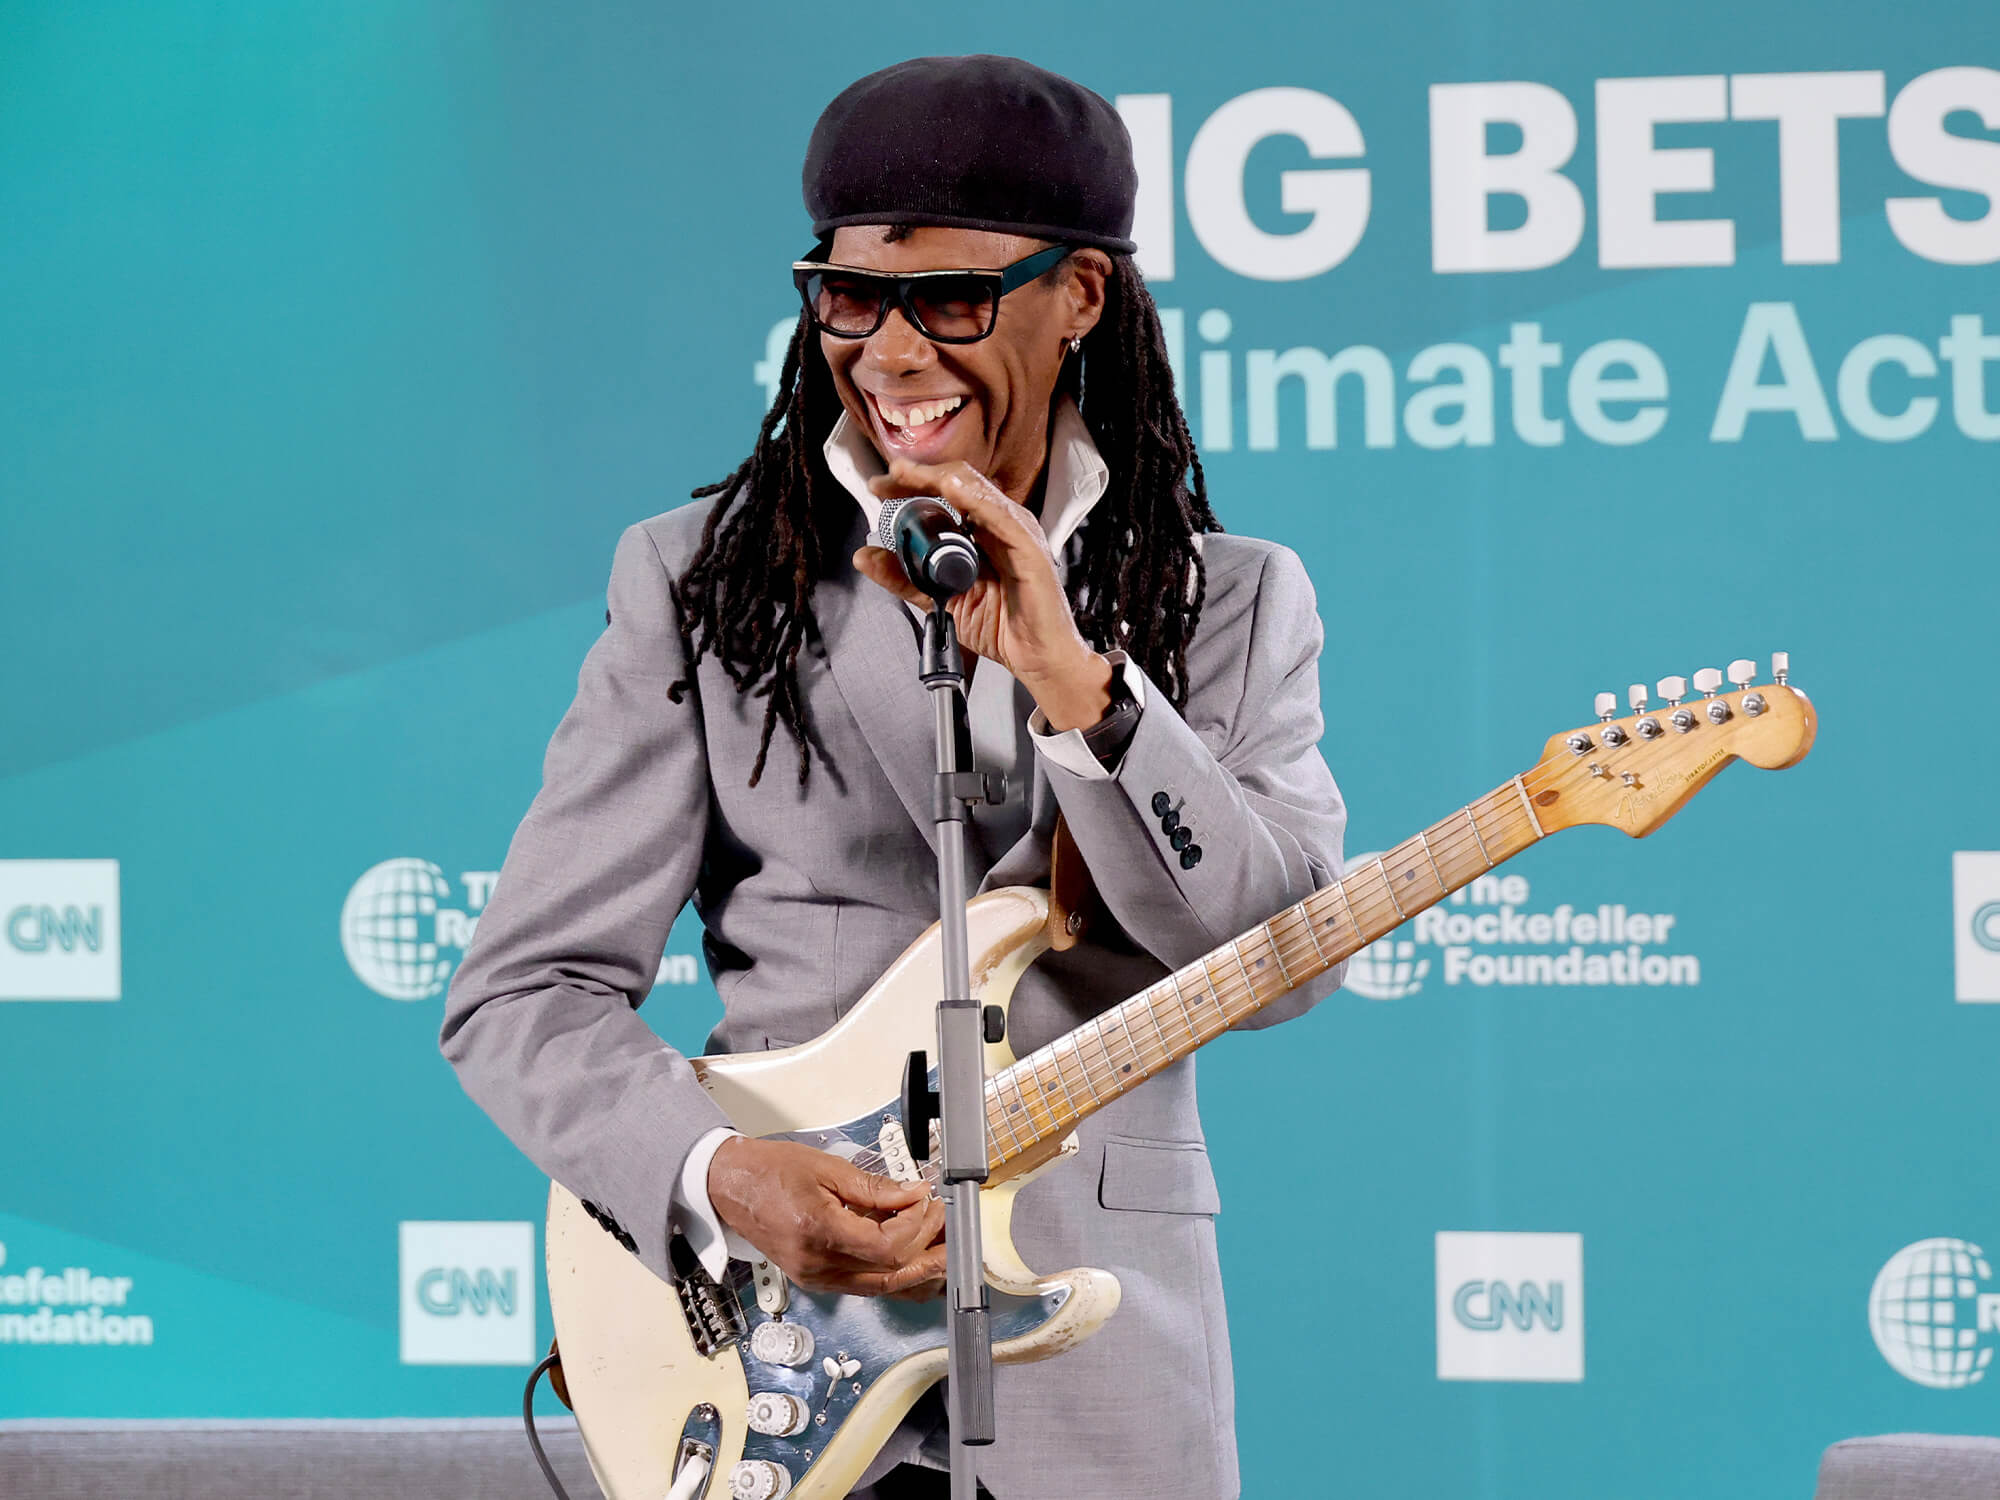 Nile Rodgers with his Hitmaker Strat. It has a shiny, reflective pick guard and a white body.